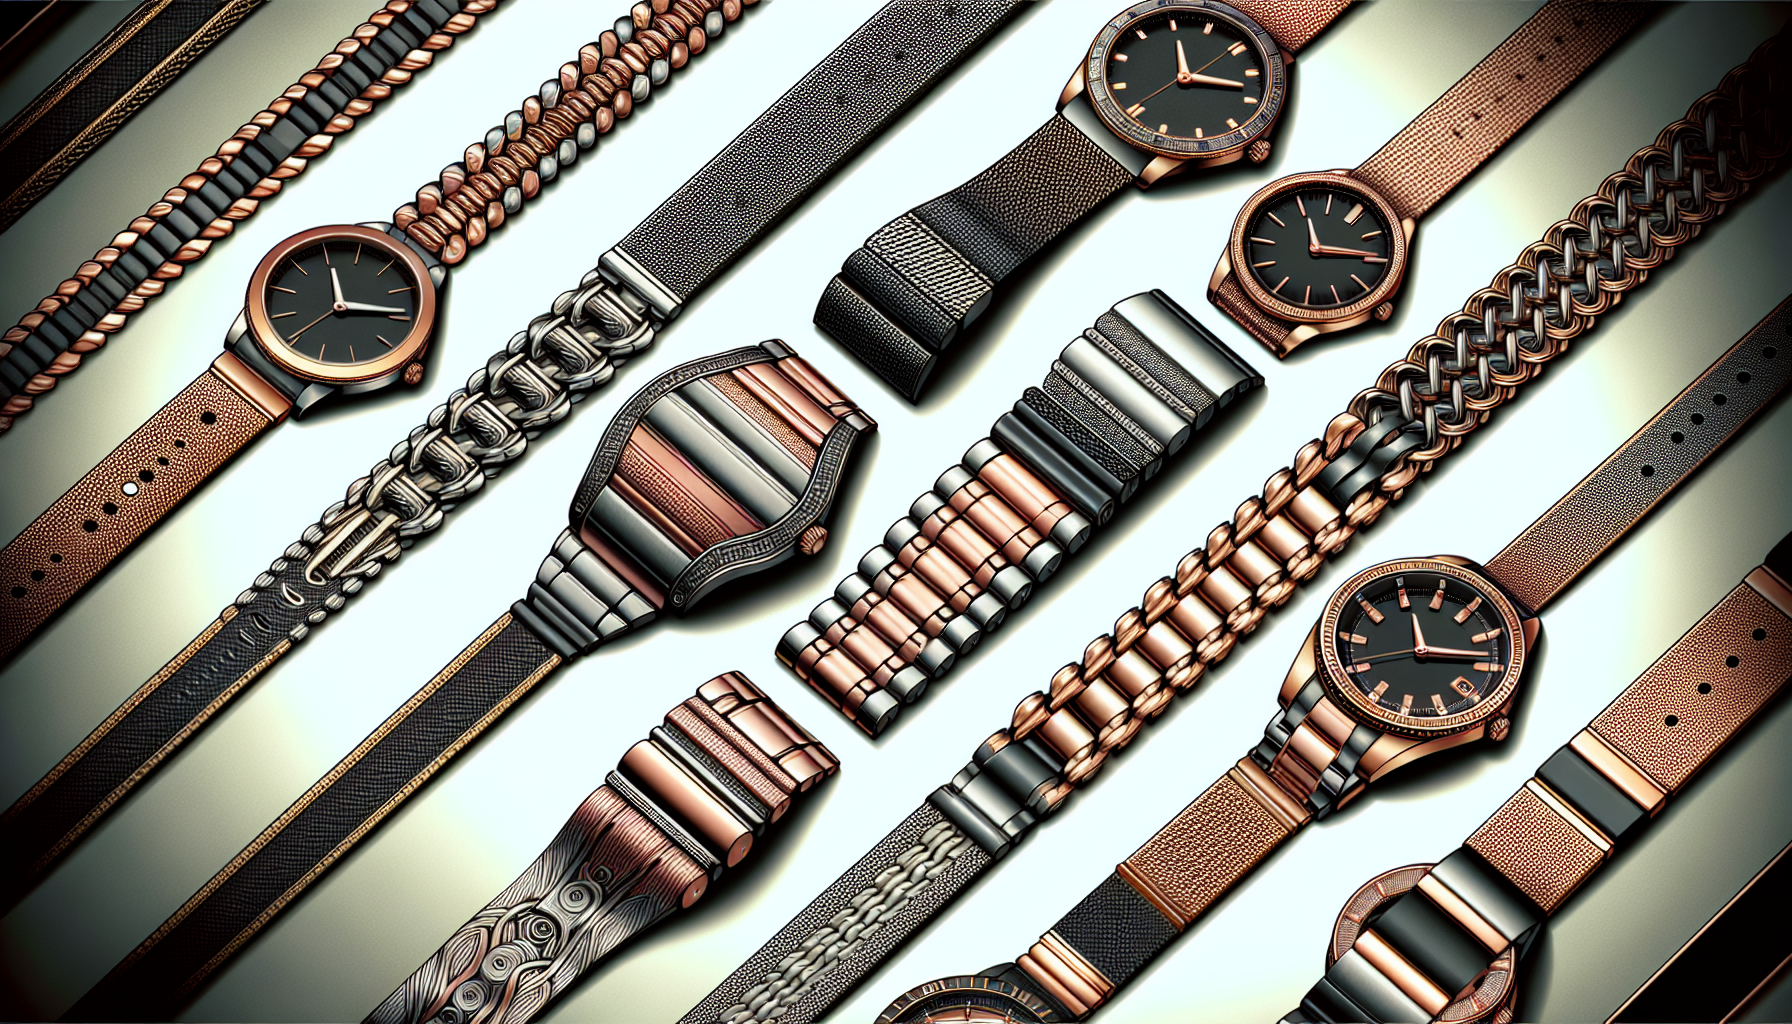 Elegant two-tone and rose gold watch bands